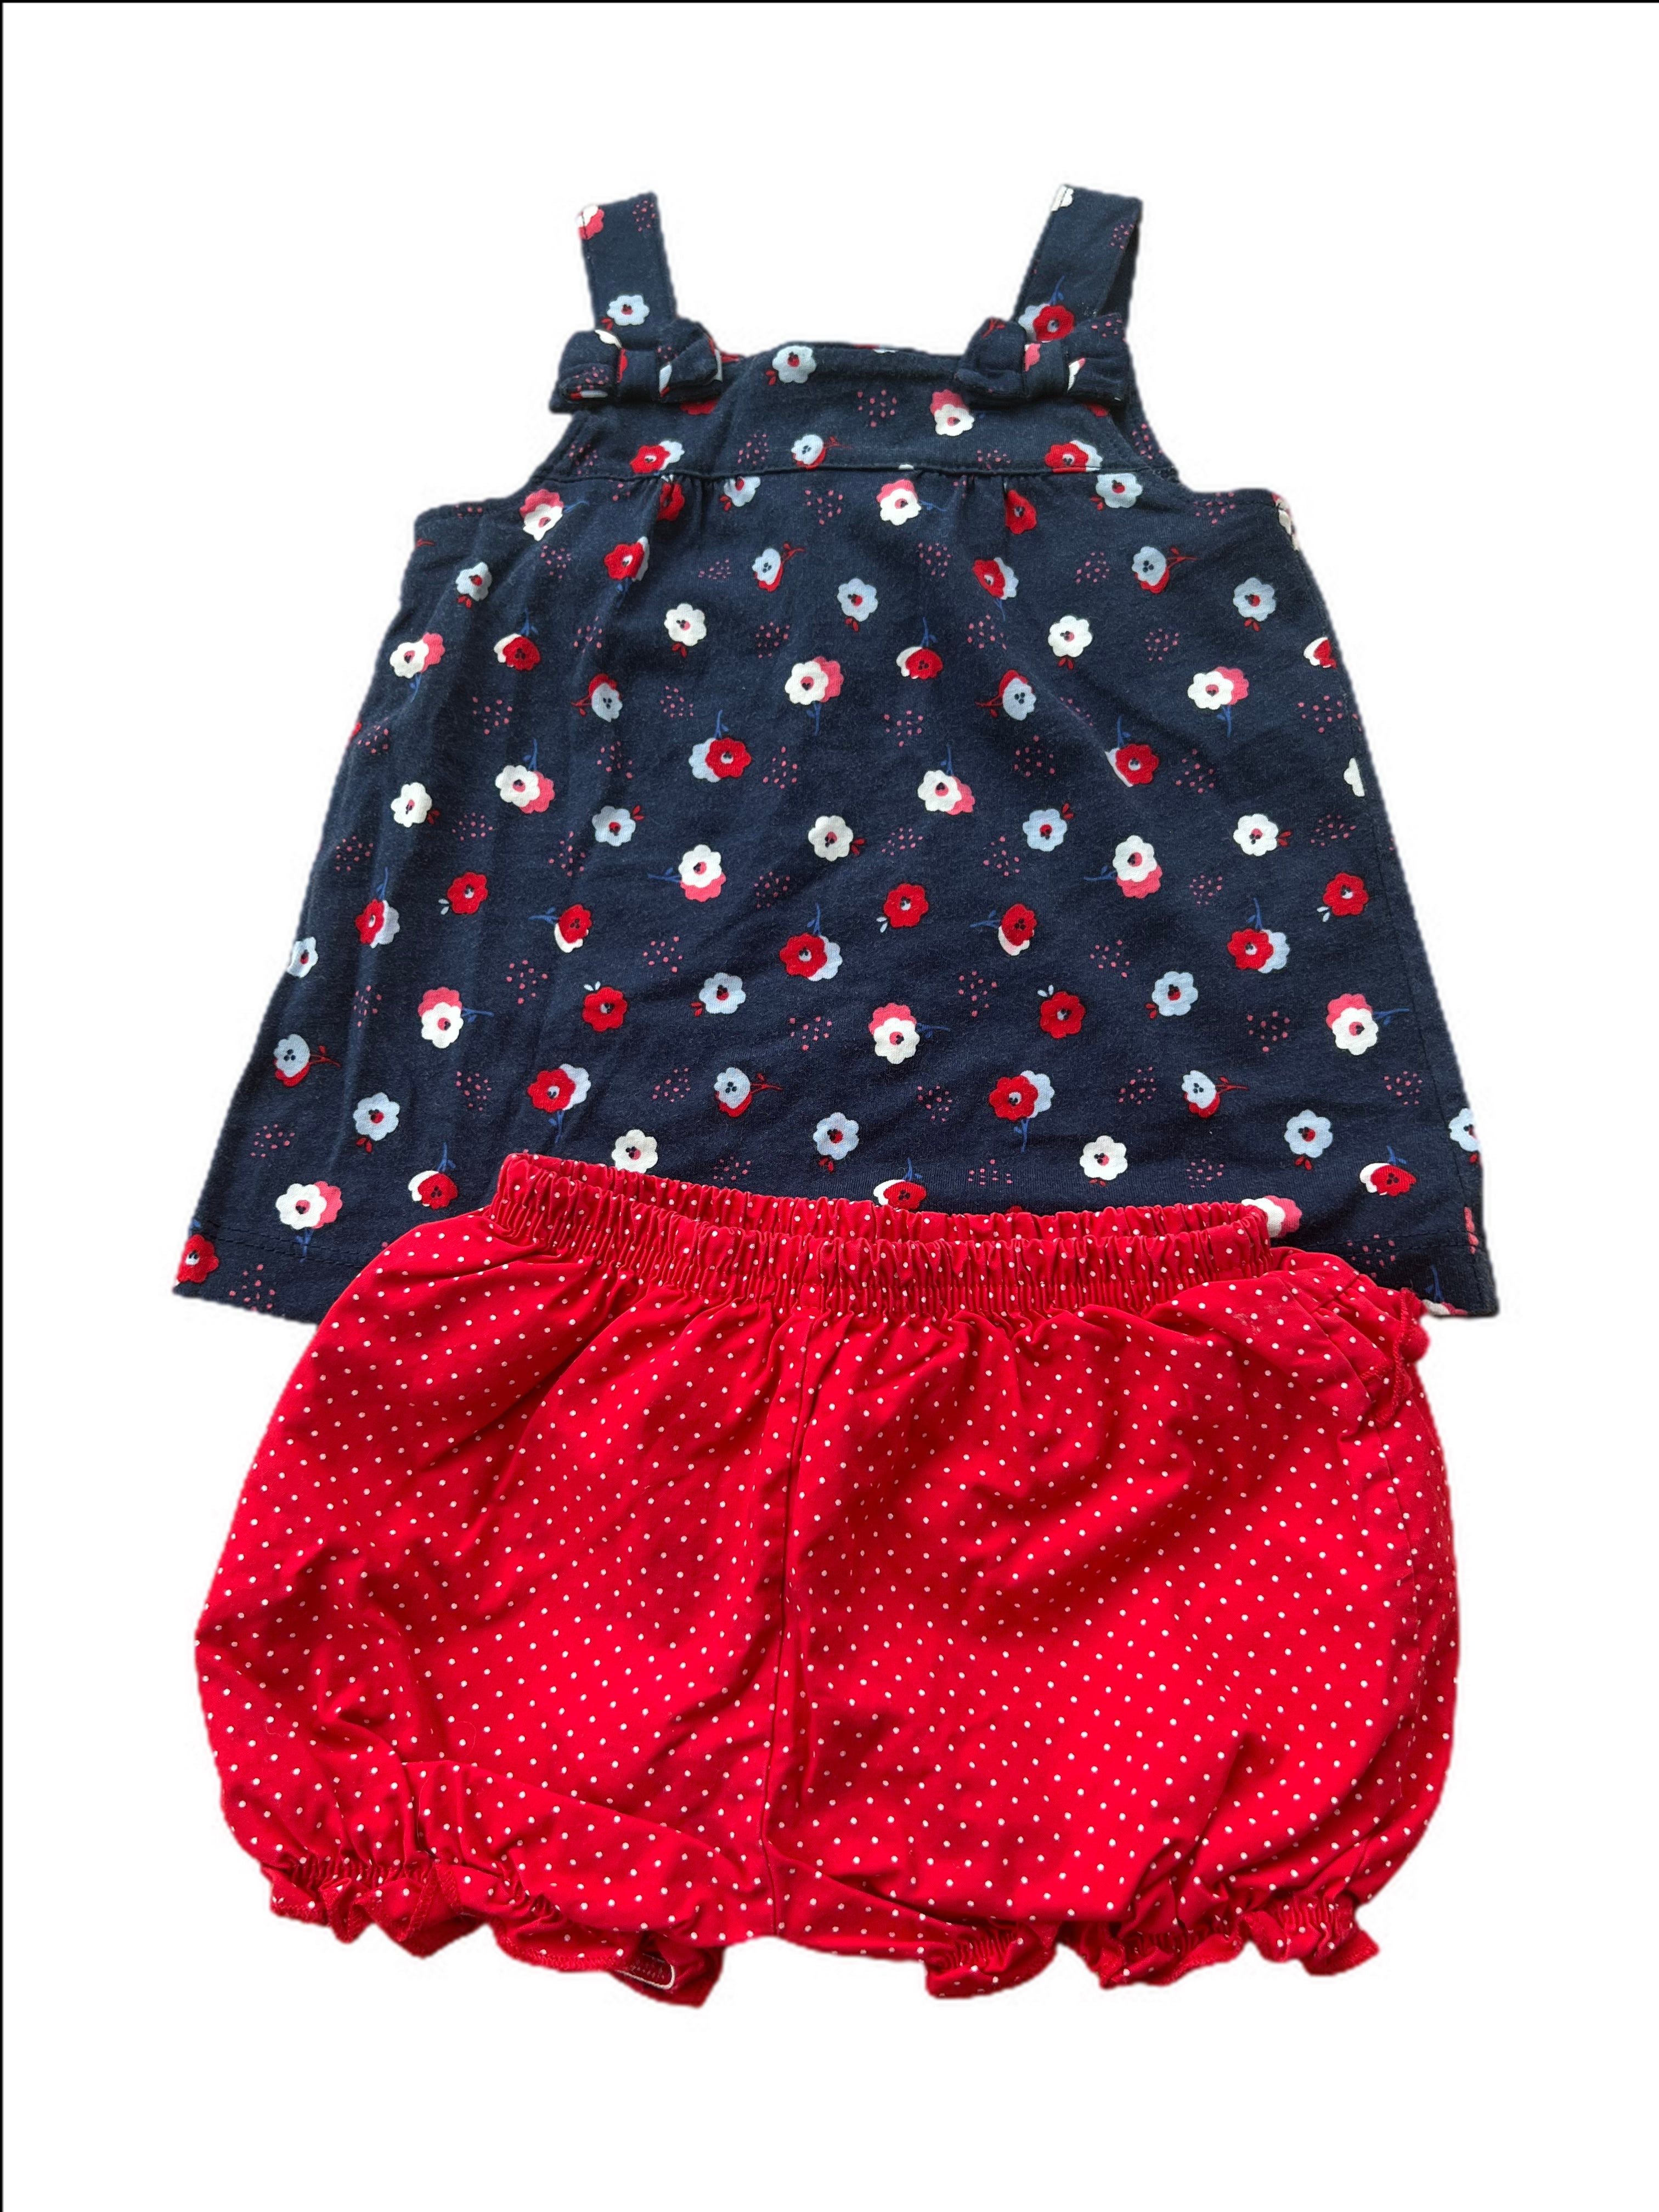 Summer top and matching bloomers